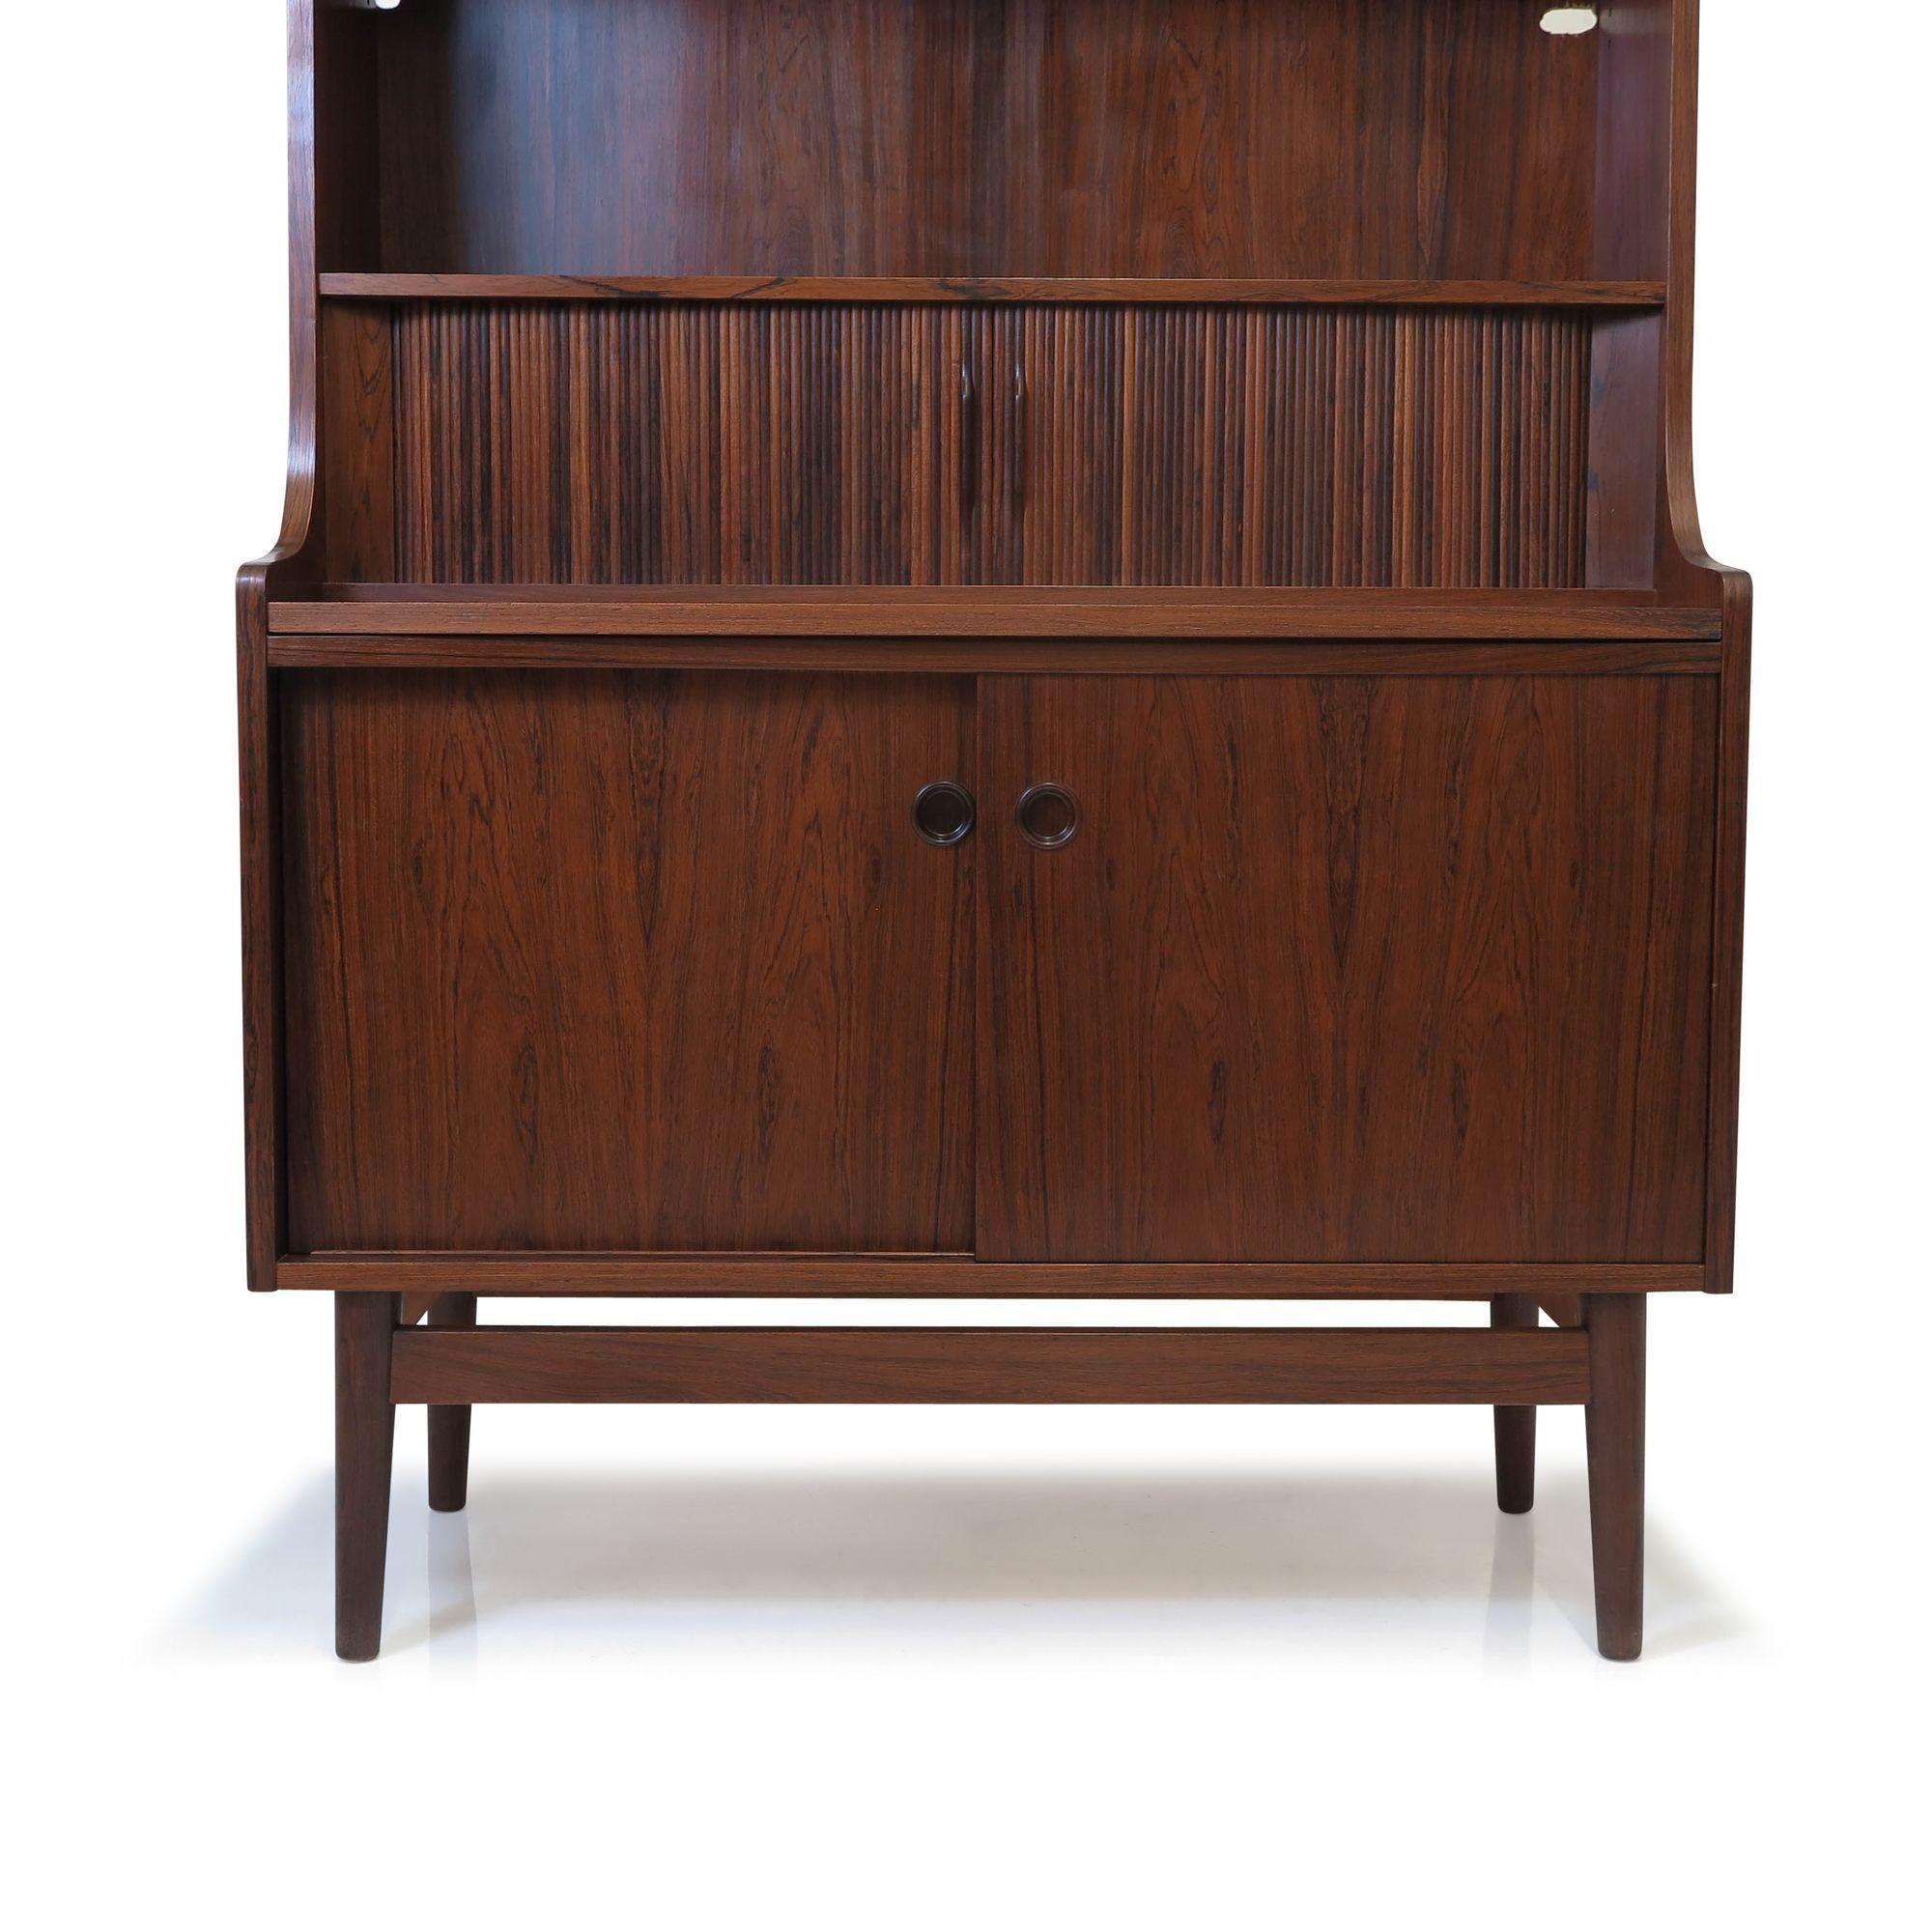 Danish Rosewood Secretary Desk and Bookcase In Excellent Condition For Sale In Oakland, CA